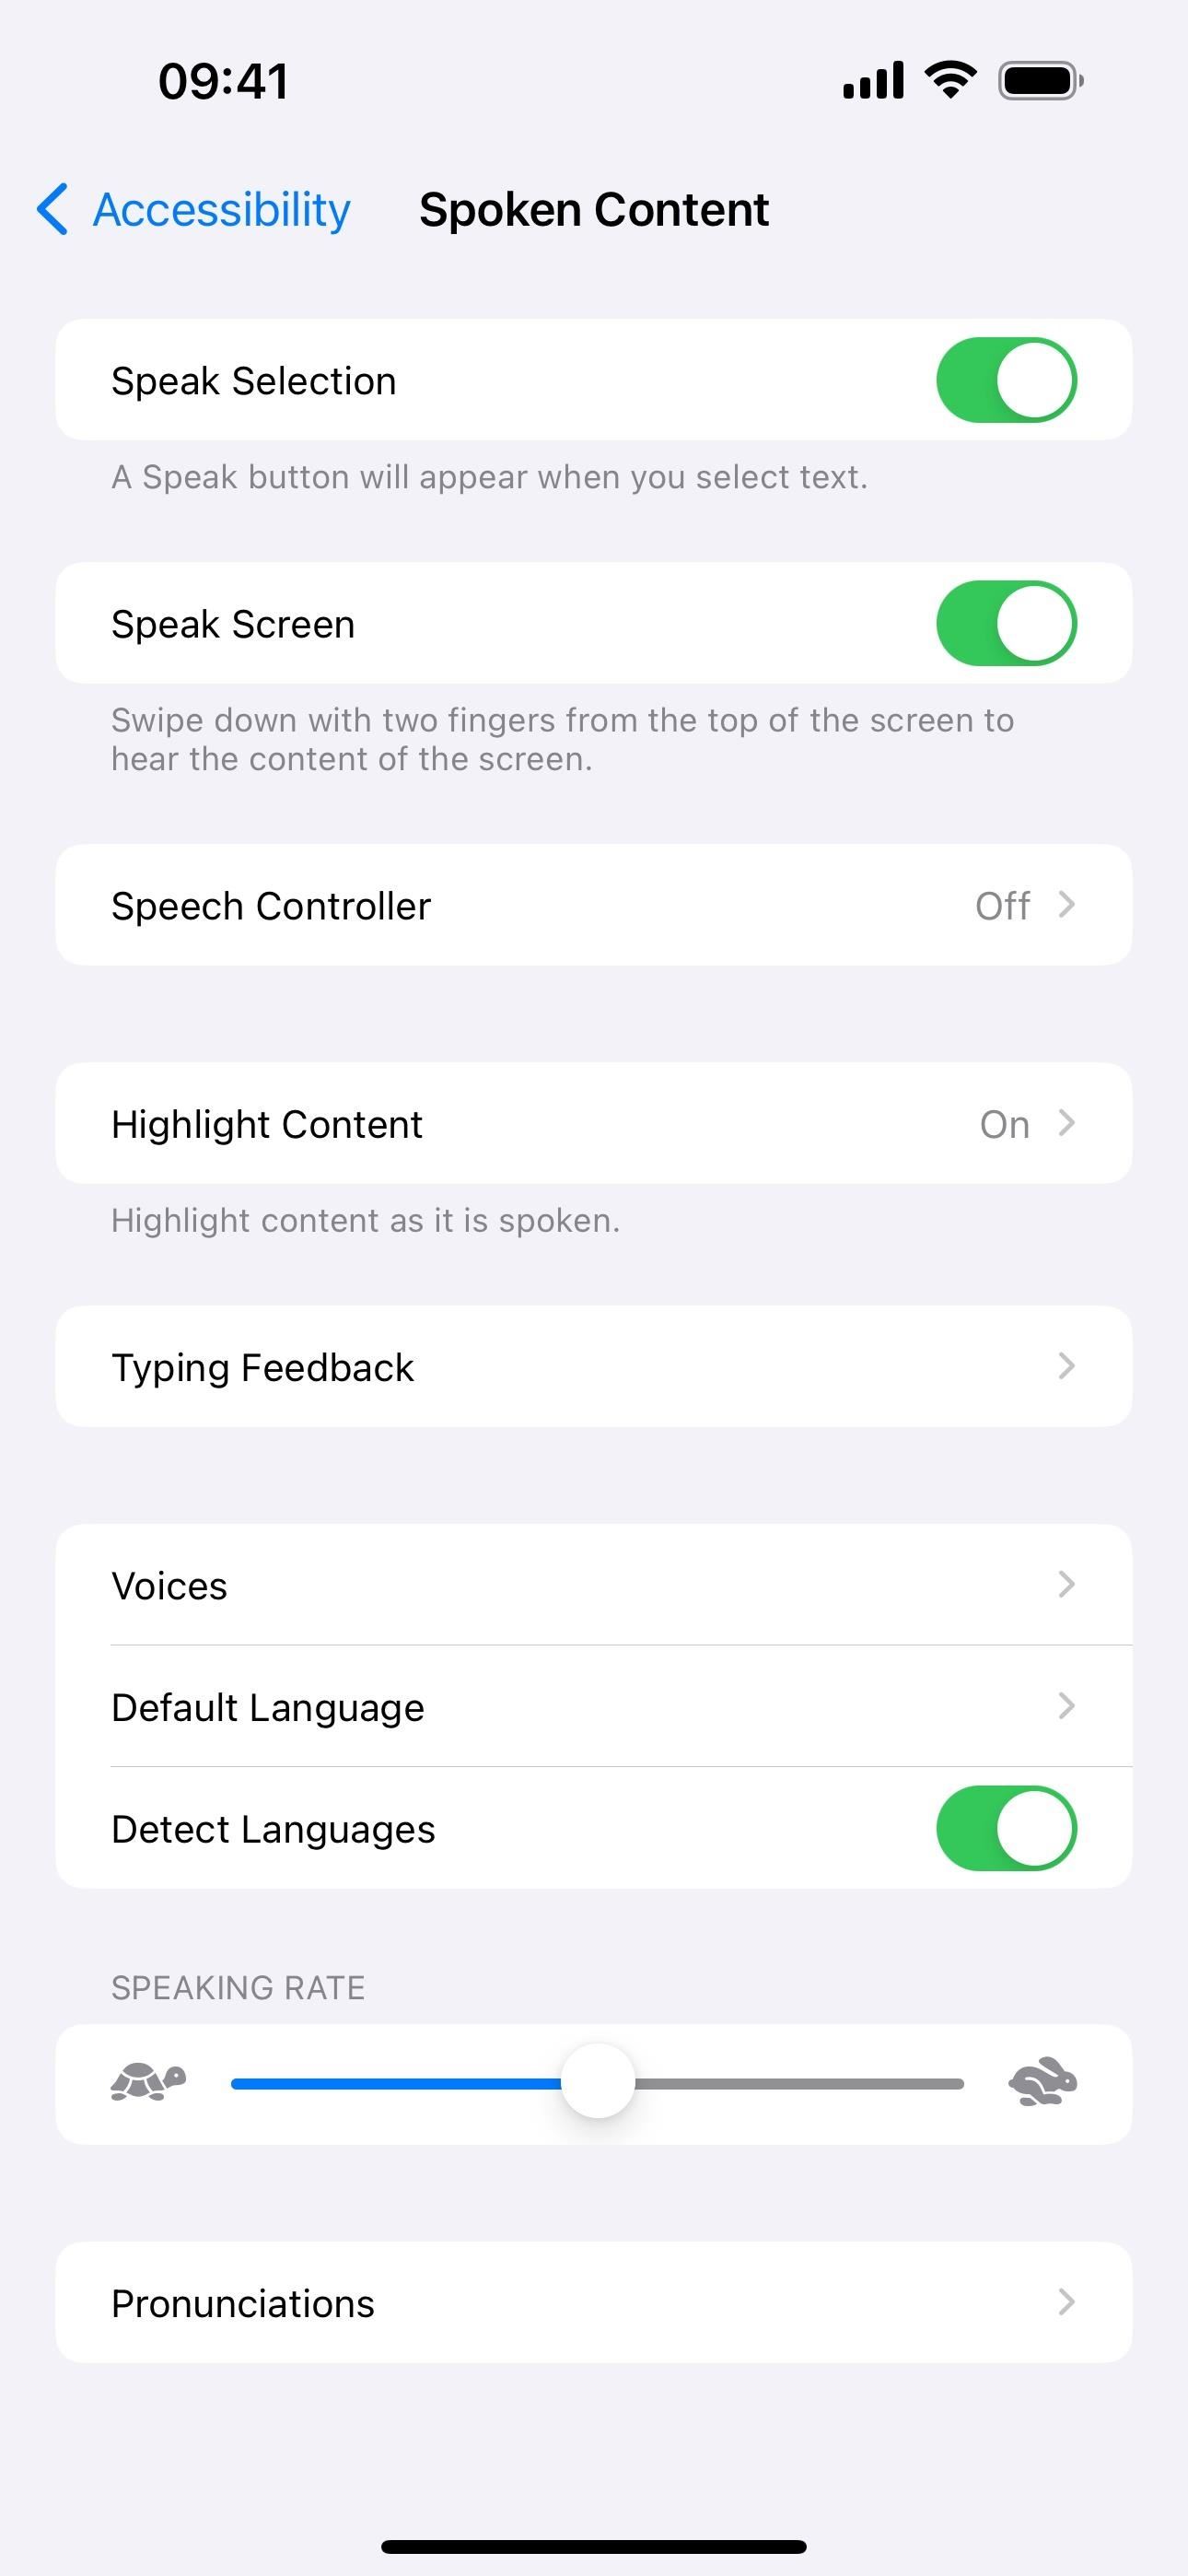 Unlock Your iPhone's Many Hidden Text-to-Speech Features to Make It Read Virtually Any On-Screen Content